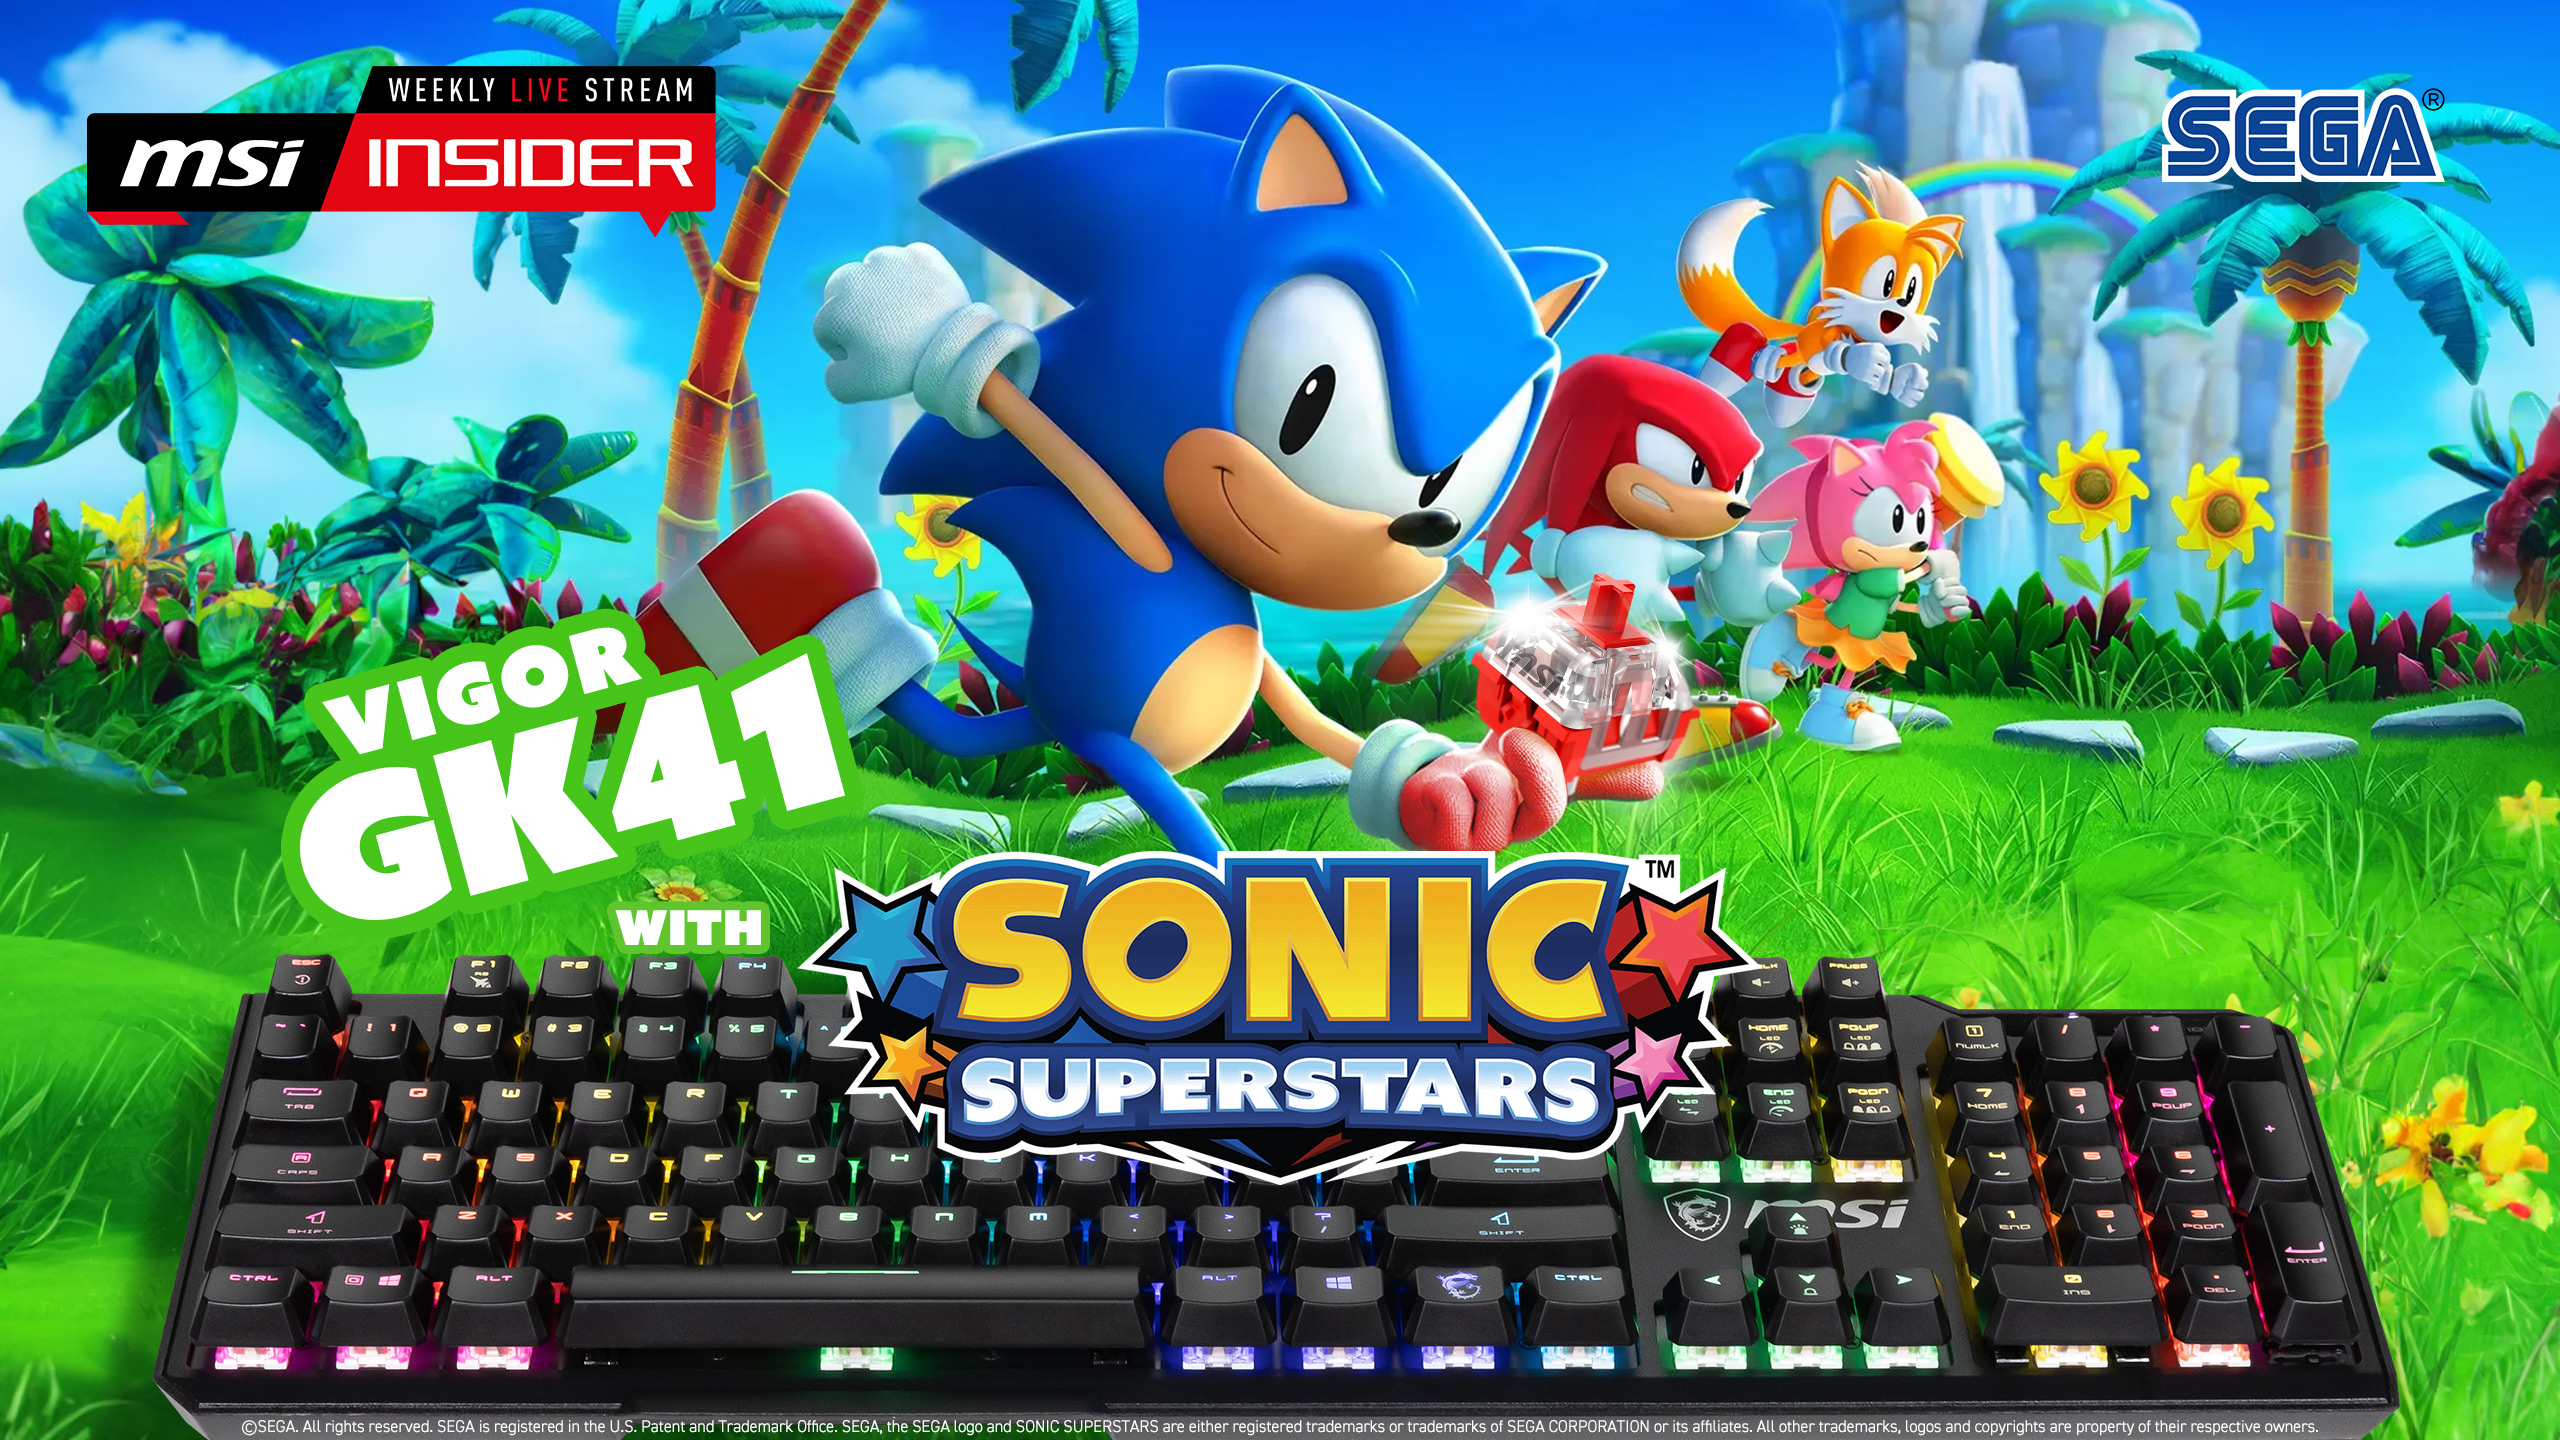 BRAND NEW! Sonic The Hedgehog Gaming Combo Set With Keyboard